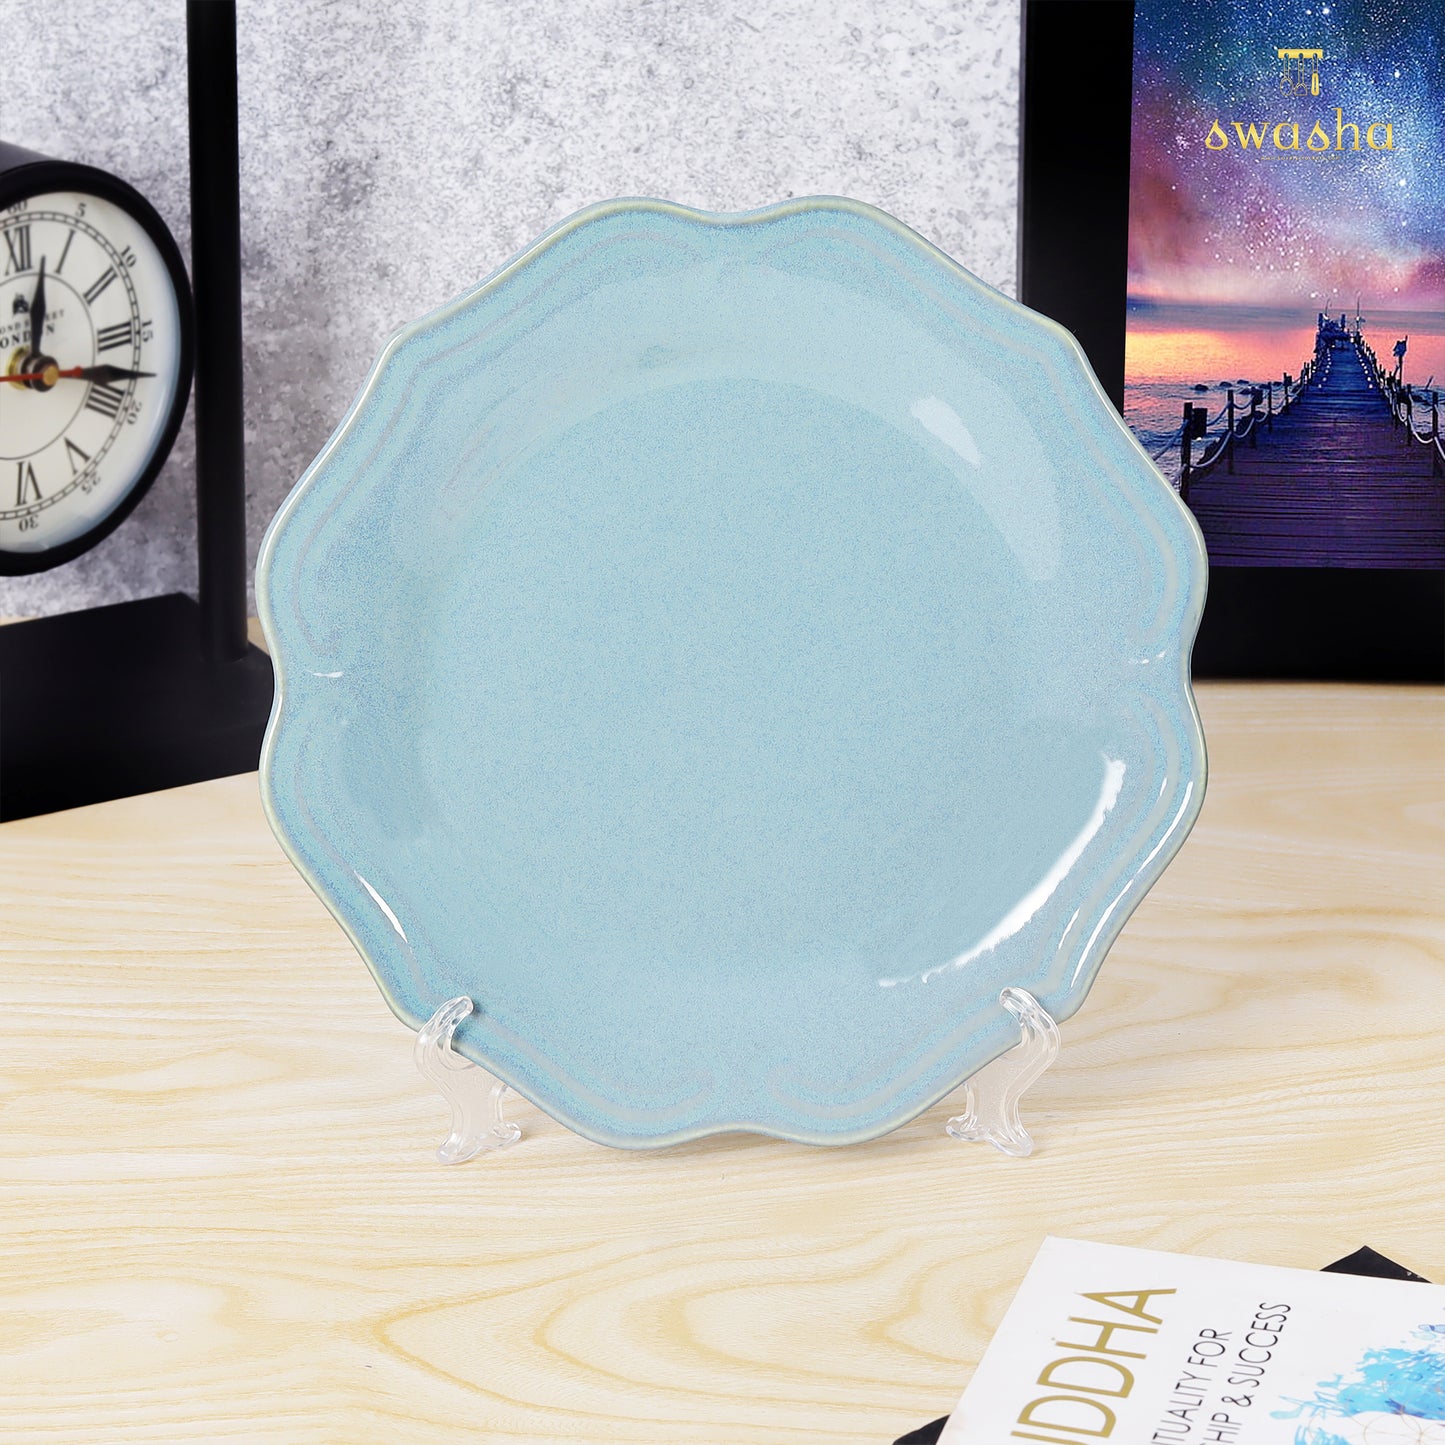 Ceramic snack plate - ideal for stylishly presenting delightful treats